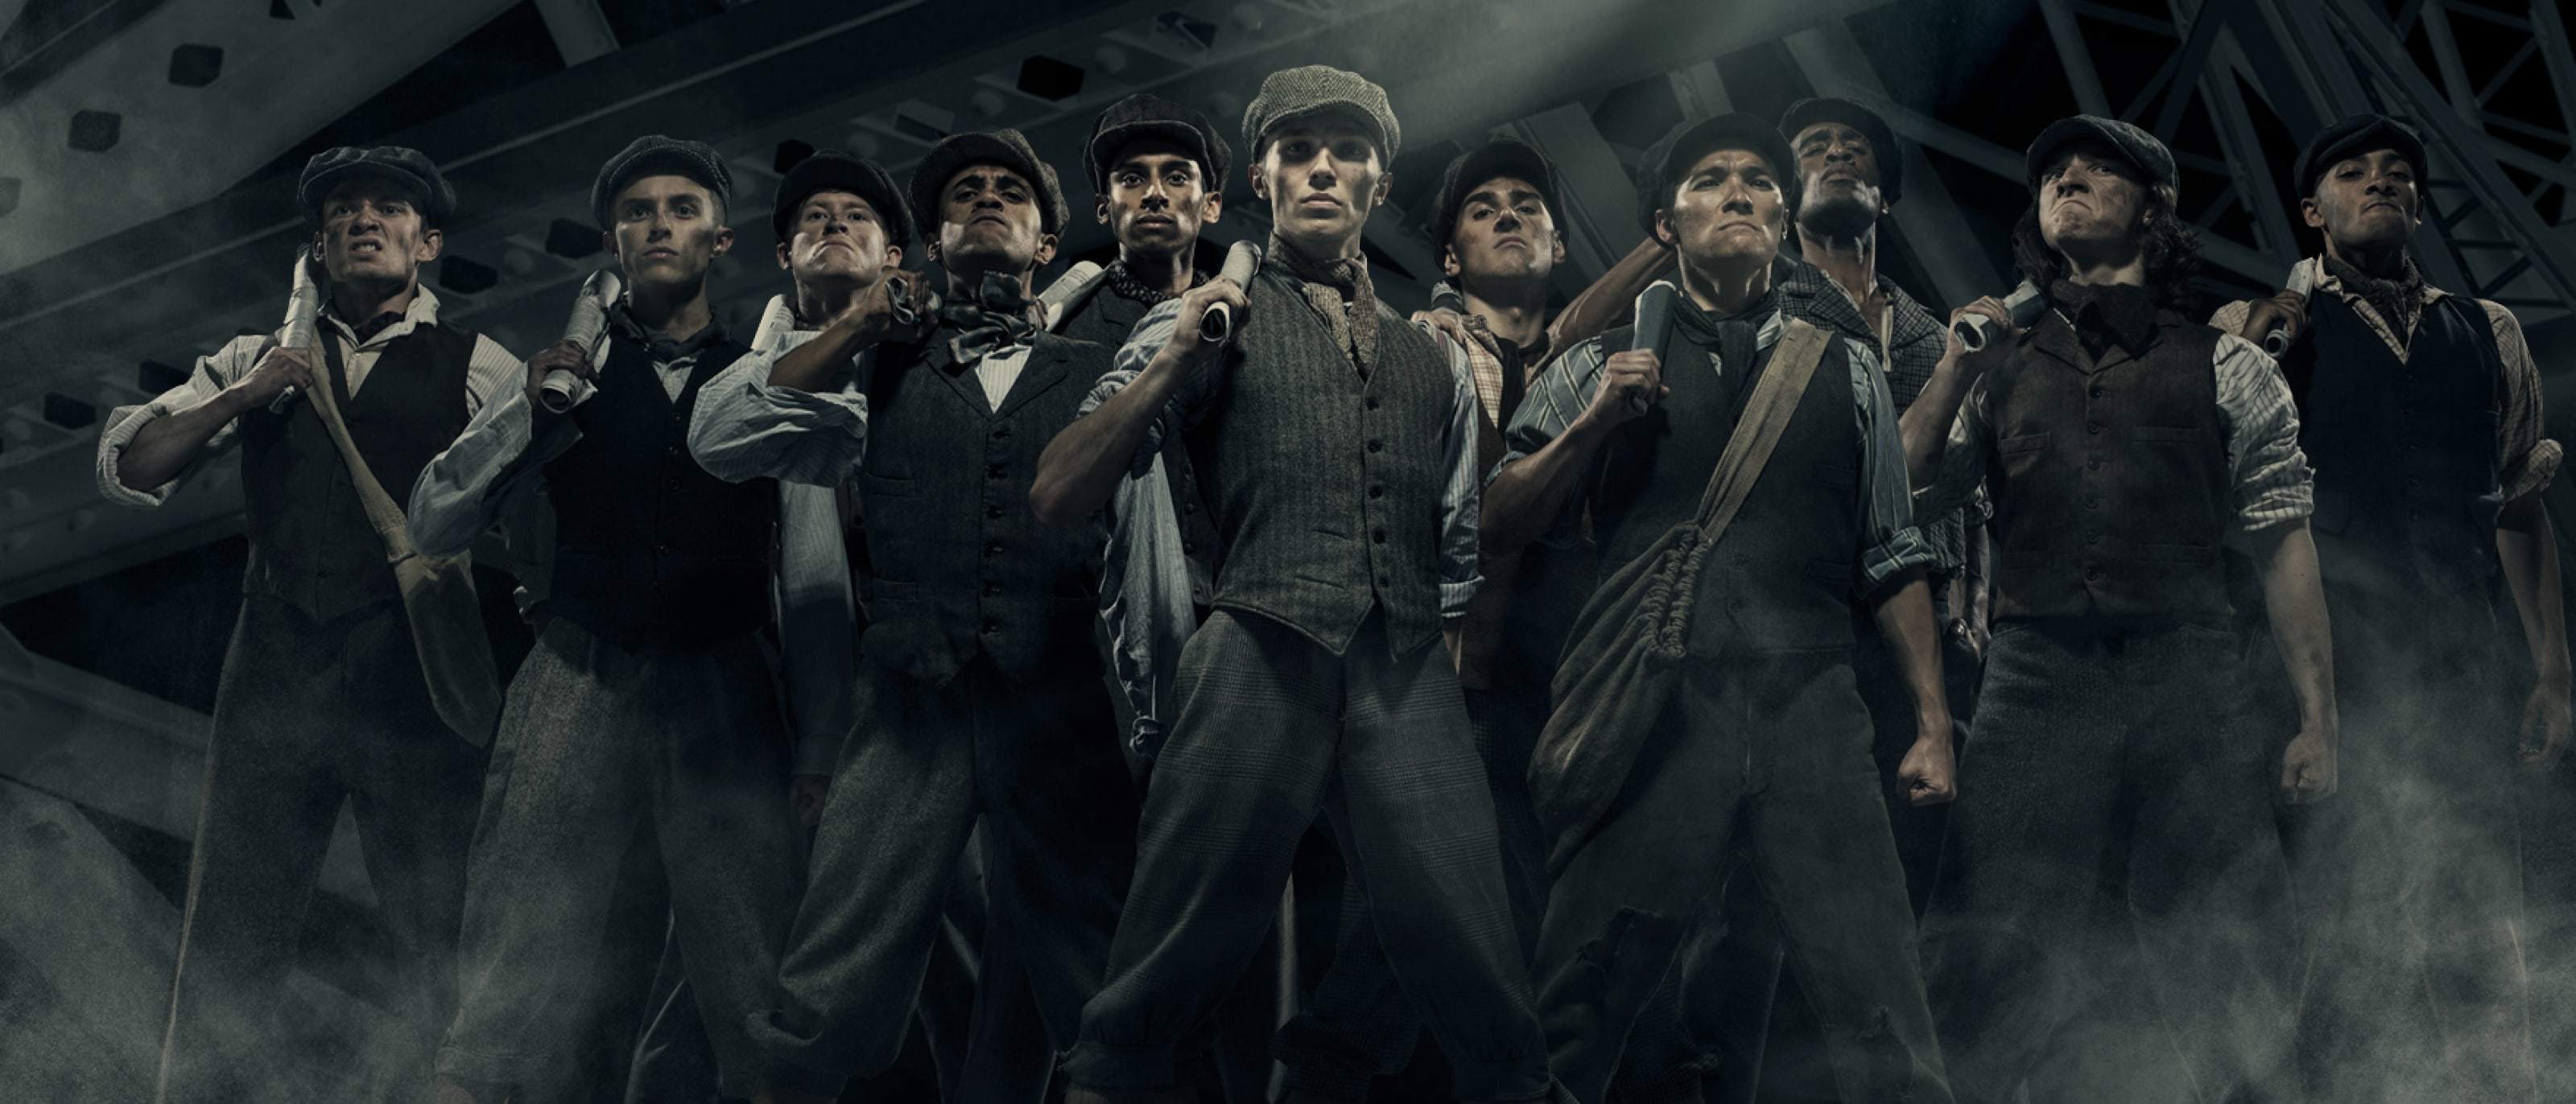 Find out more about Disney's Newsies the Musical